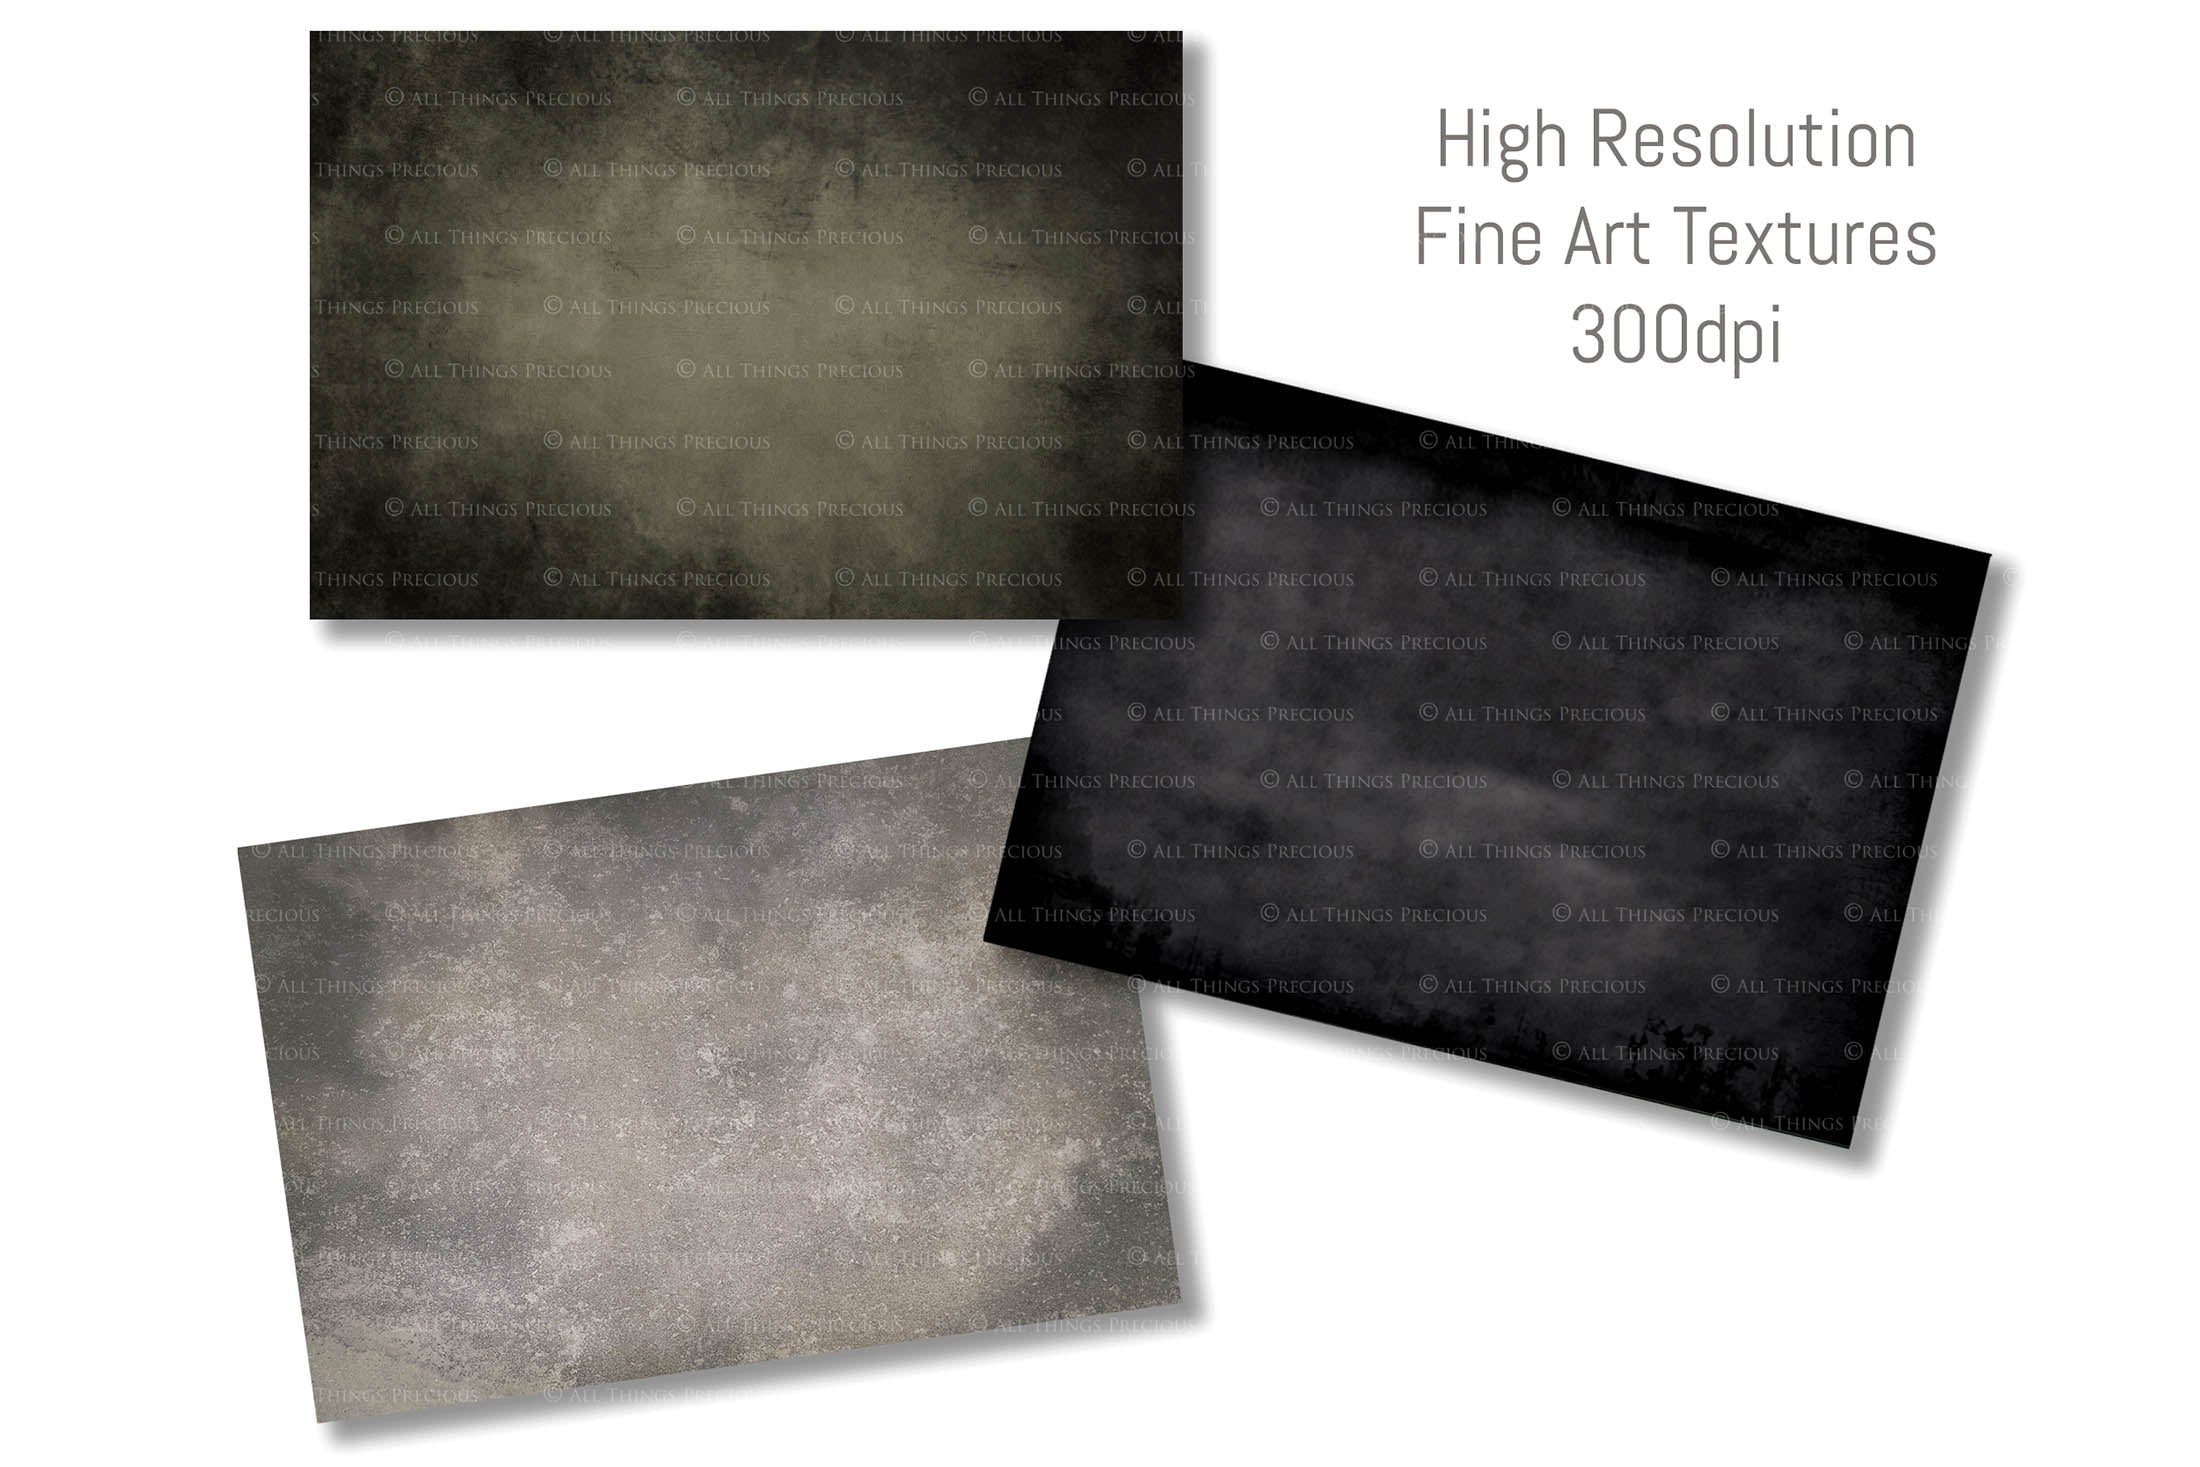 Fine art texture for photographers, digital editing. Photo Overlays. Antique, Old World, Grunge, Light, Bundle. Textured printable Canvas, Colour, black and white, Bundle. High resolution, 300dpi Graphic Assets for photography, digital scrapbooking and design. By ATP Textures